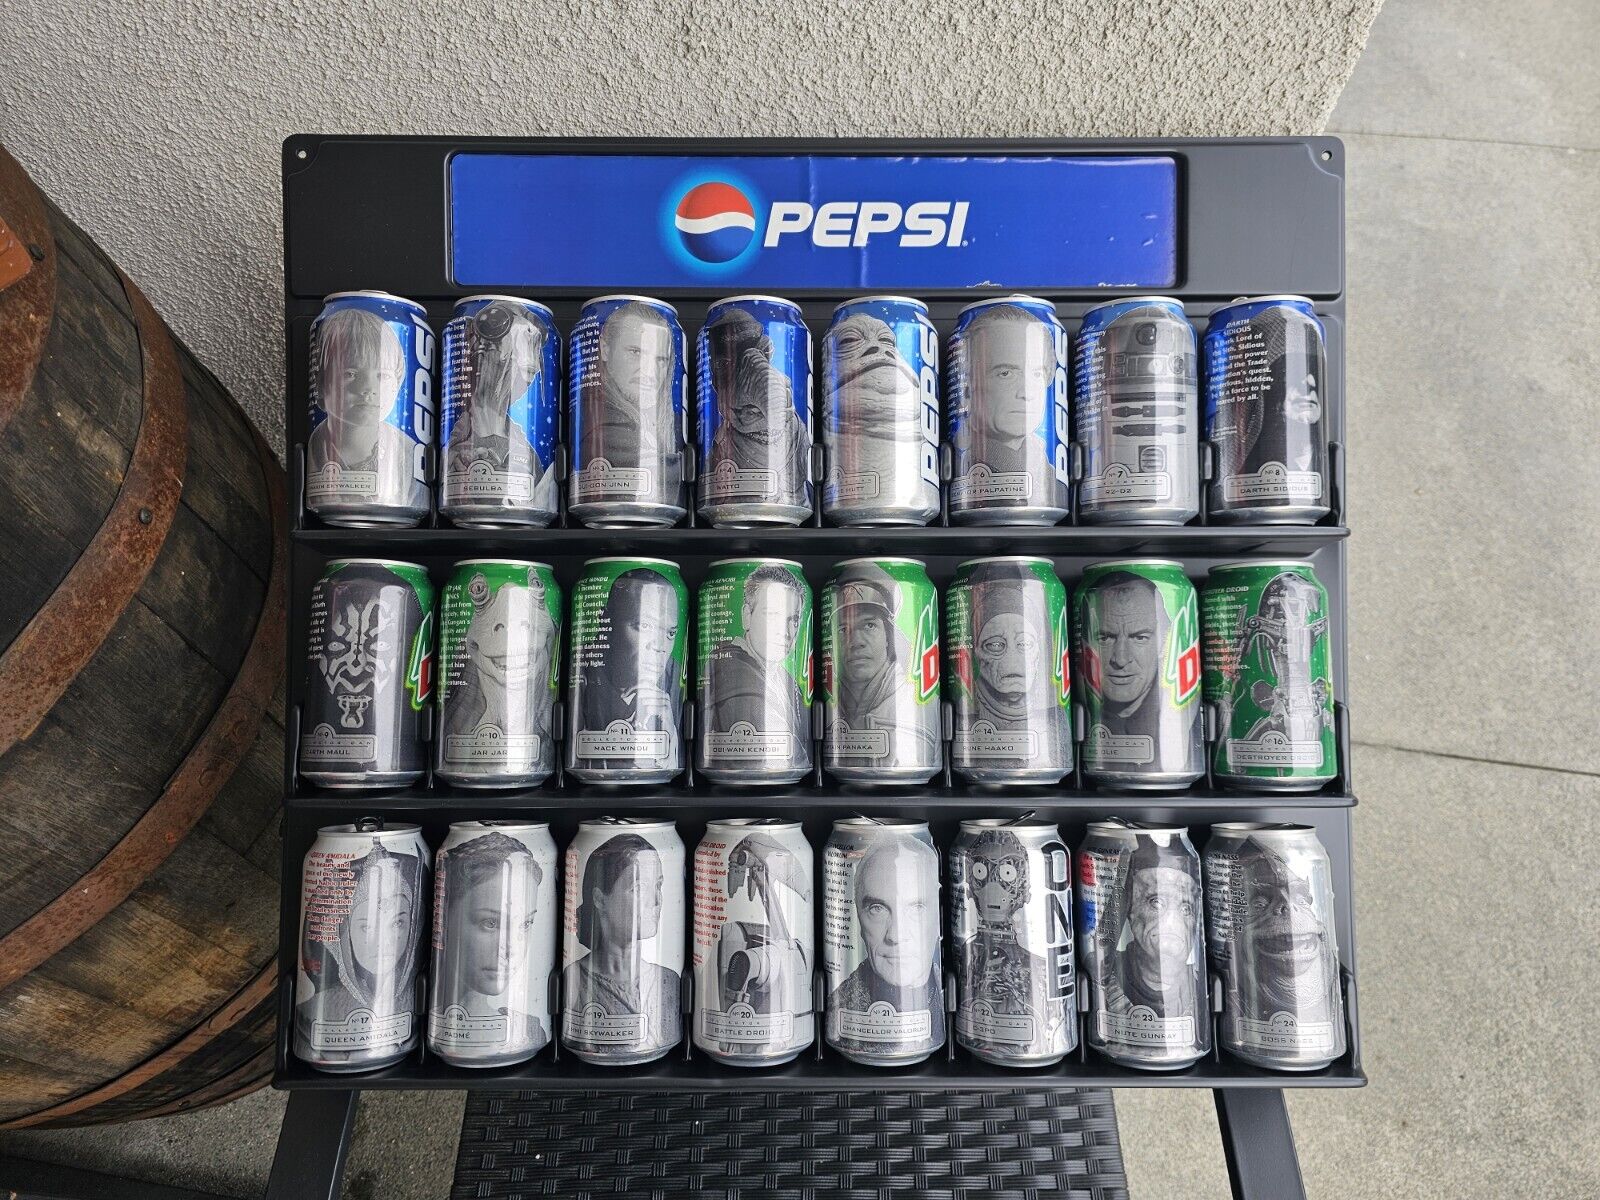 Star Wars Episode 1 Pepsi Cans